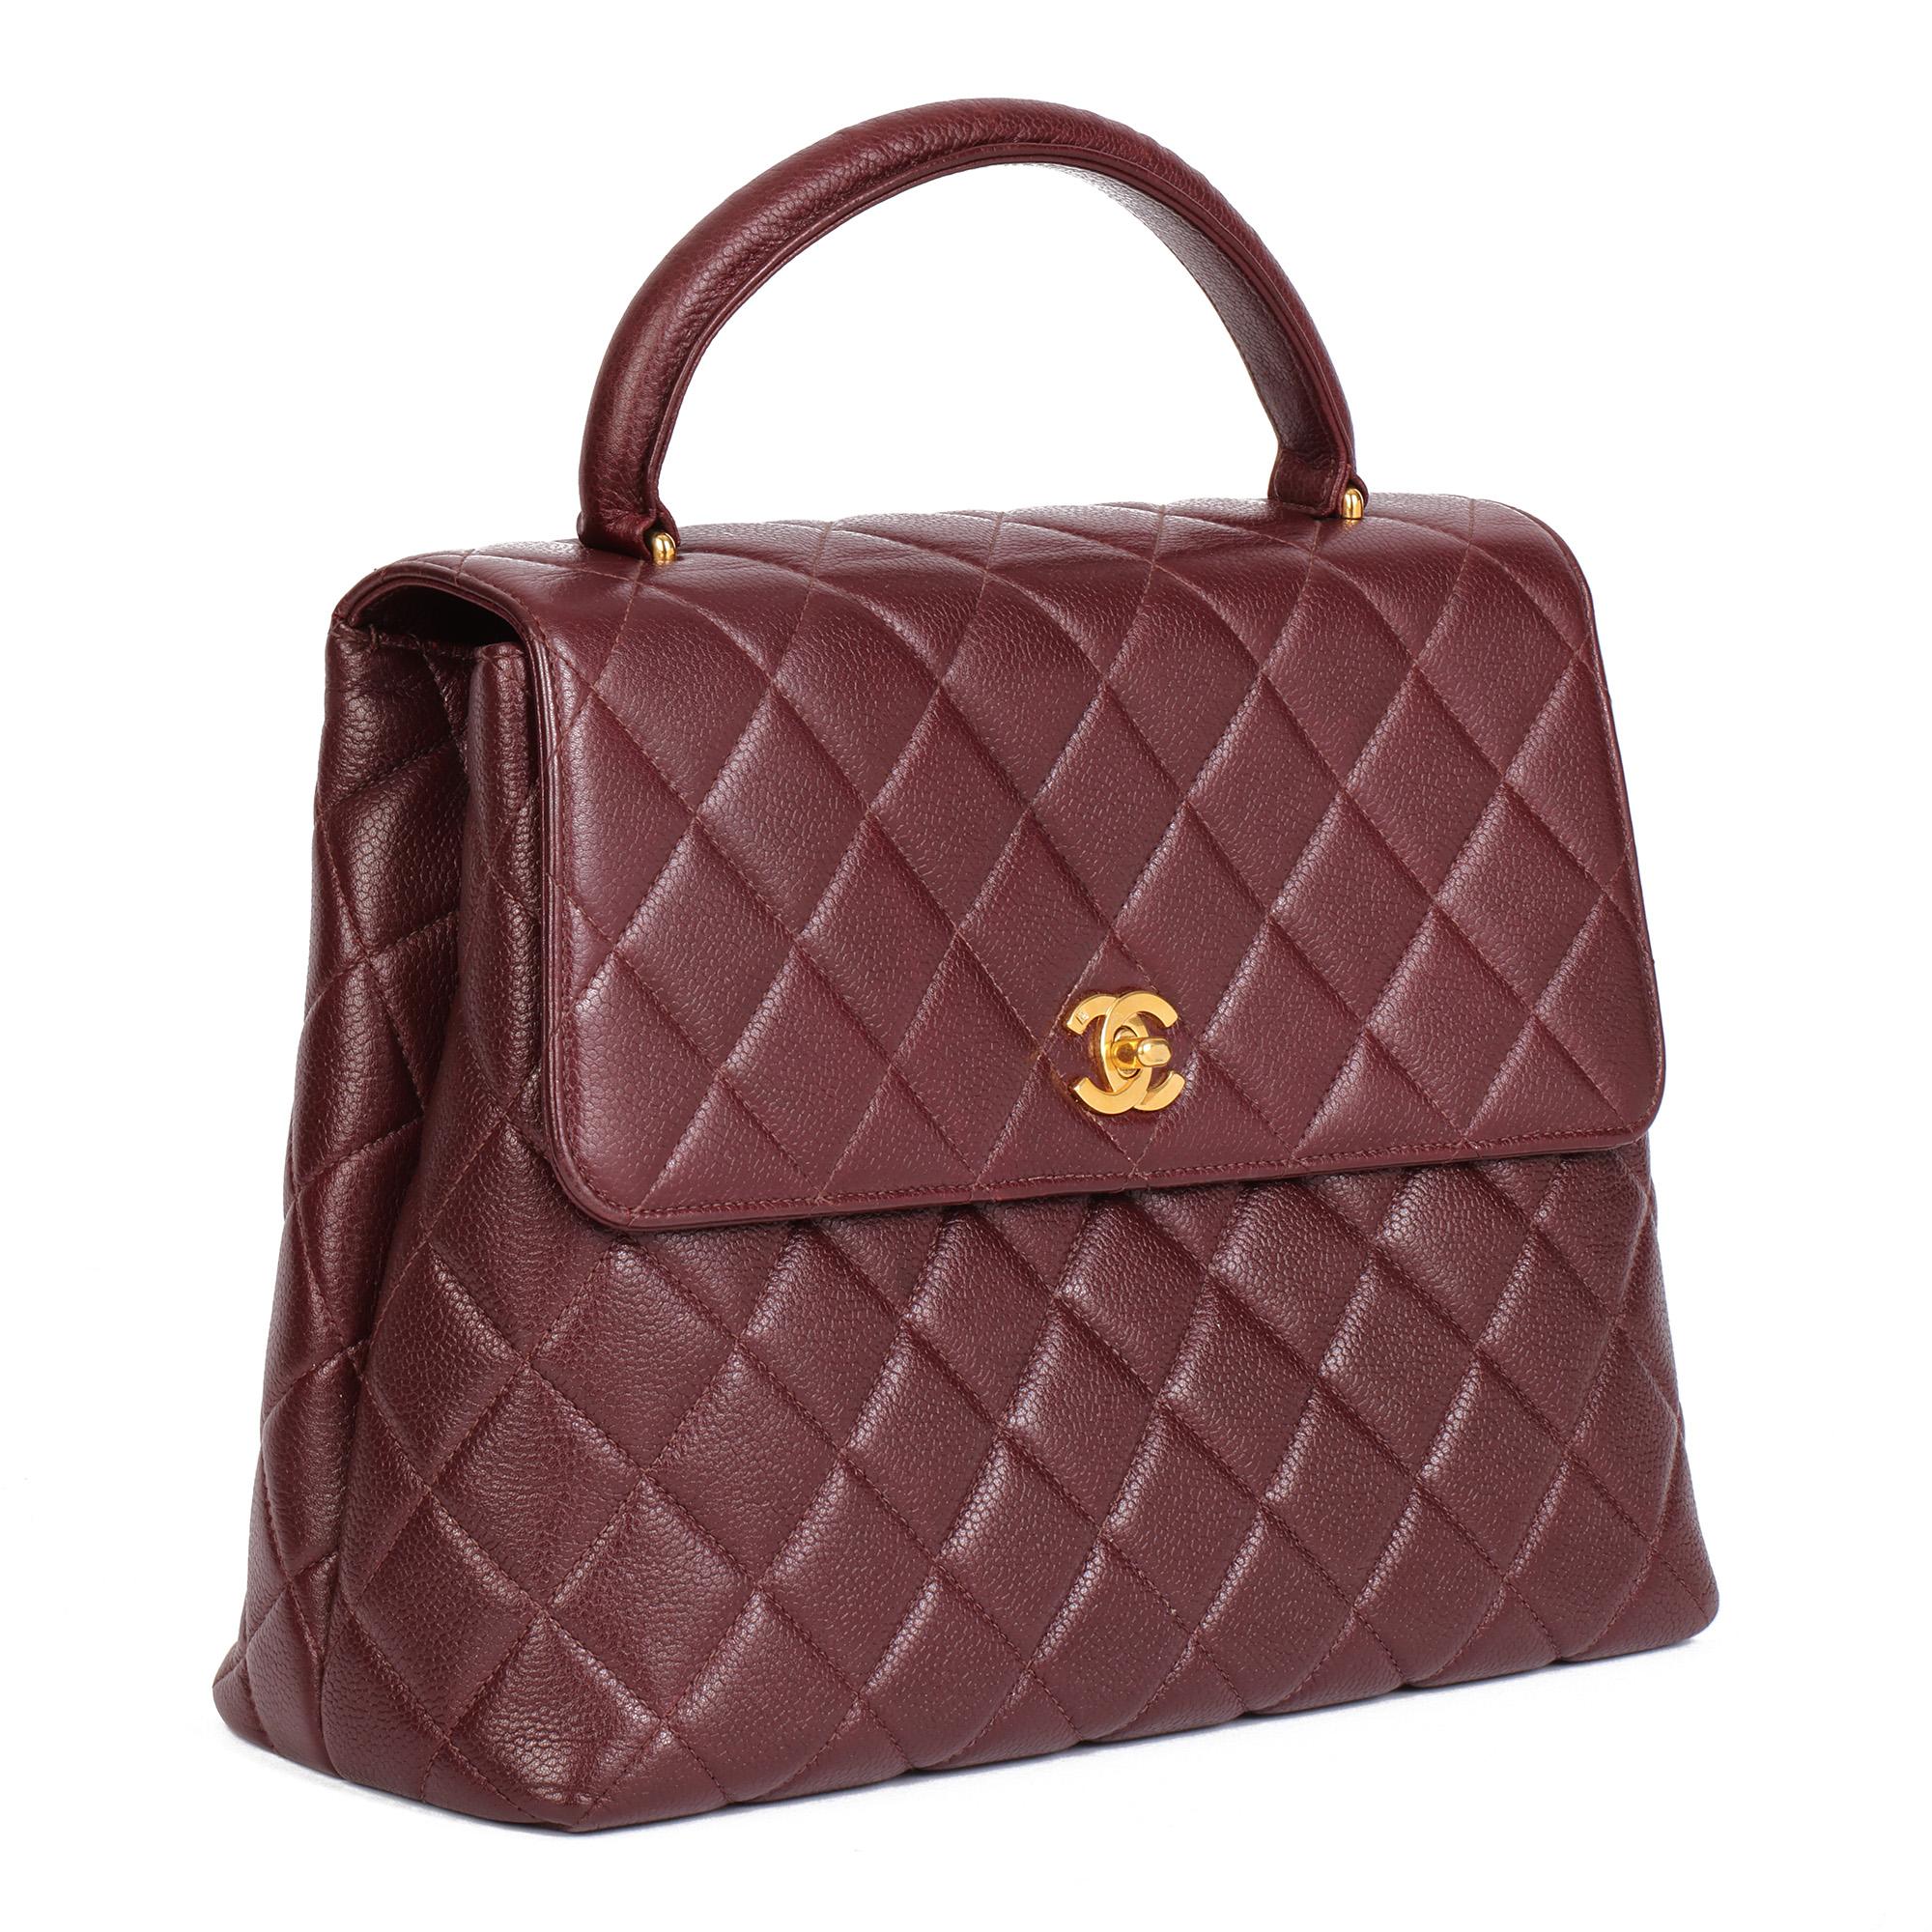 CHANEL
Bordeaux Quilted Caviar Leather Vintage Classic Kelly 

Serial Number: 4374449
Age (Circa): 1996
Accompanied By: Chanel Dust Bag, Authenticity Card
Authenticity Details: Authenticity Card, Serial Sticker (Made in France)
Gender: Ladies
Type: